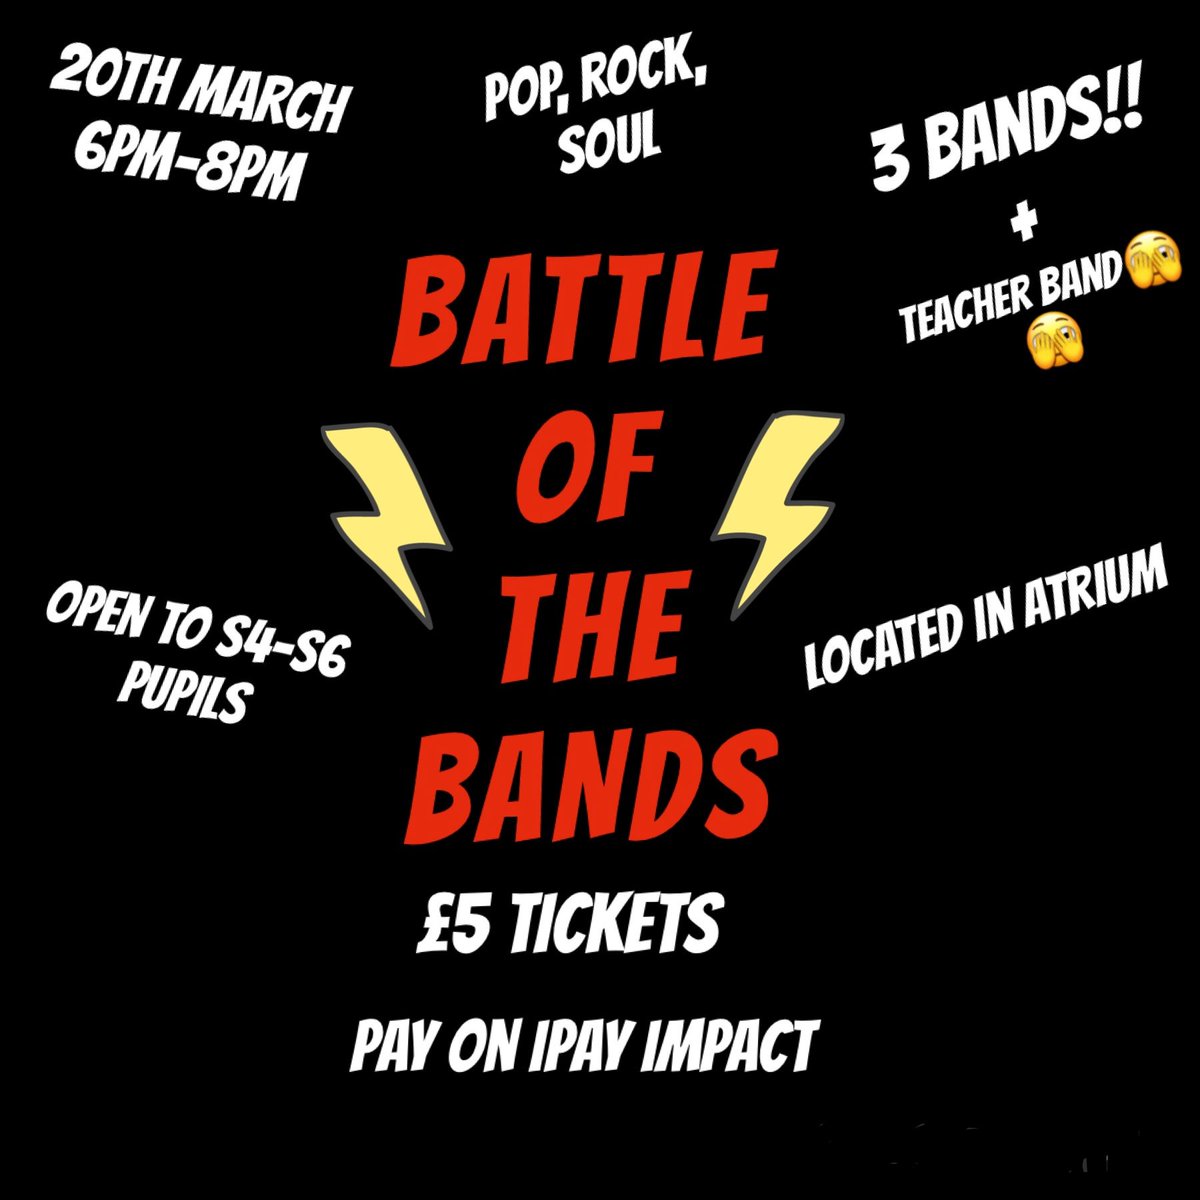 The Battle of the Bands concert will take place on Wednesday 20th March from 6pm to 8pm. All S4-6 students invited in what will be a night to remember.